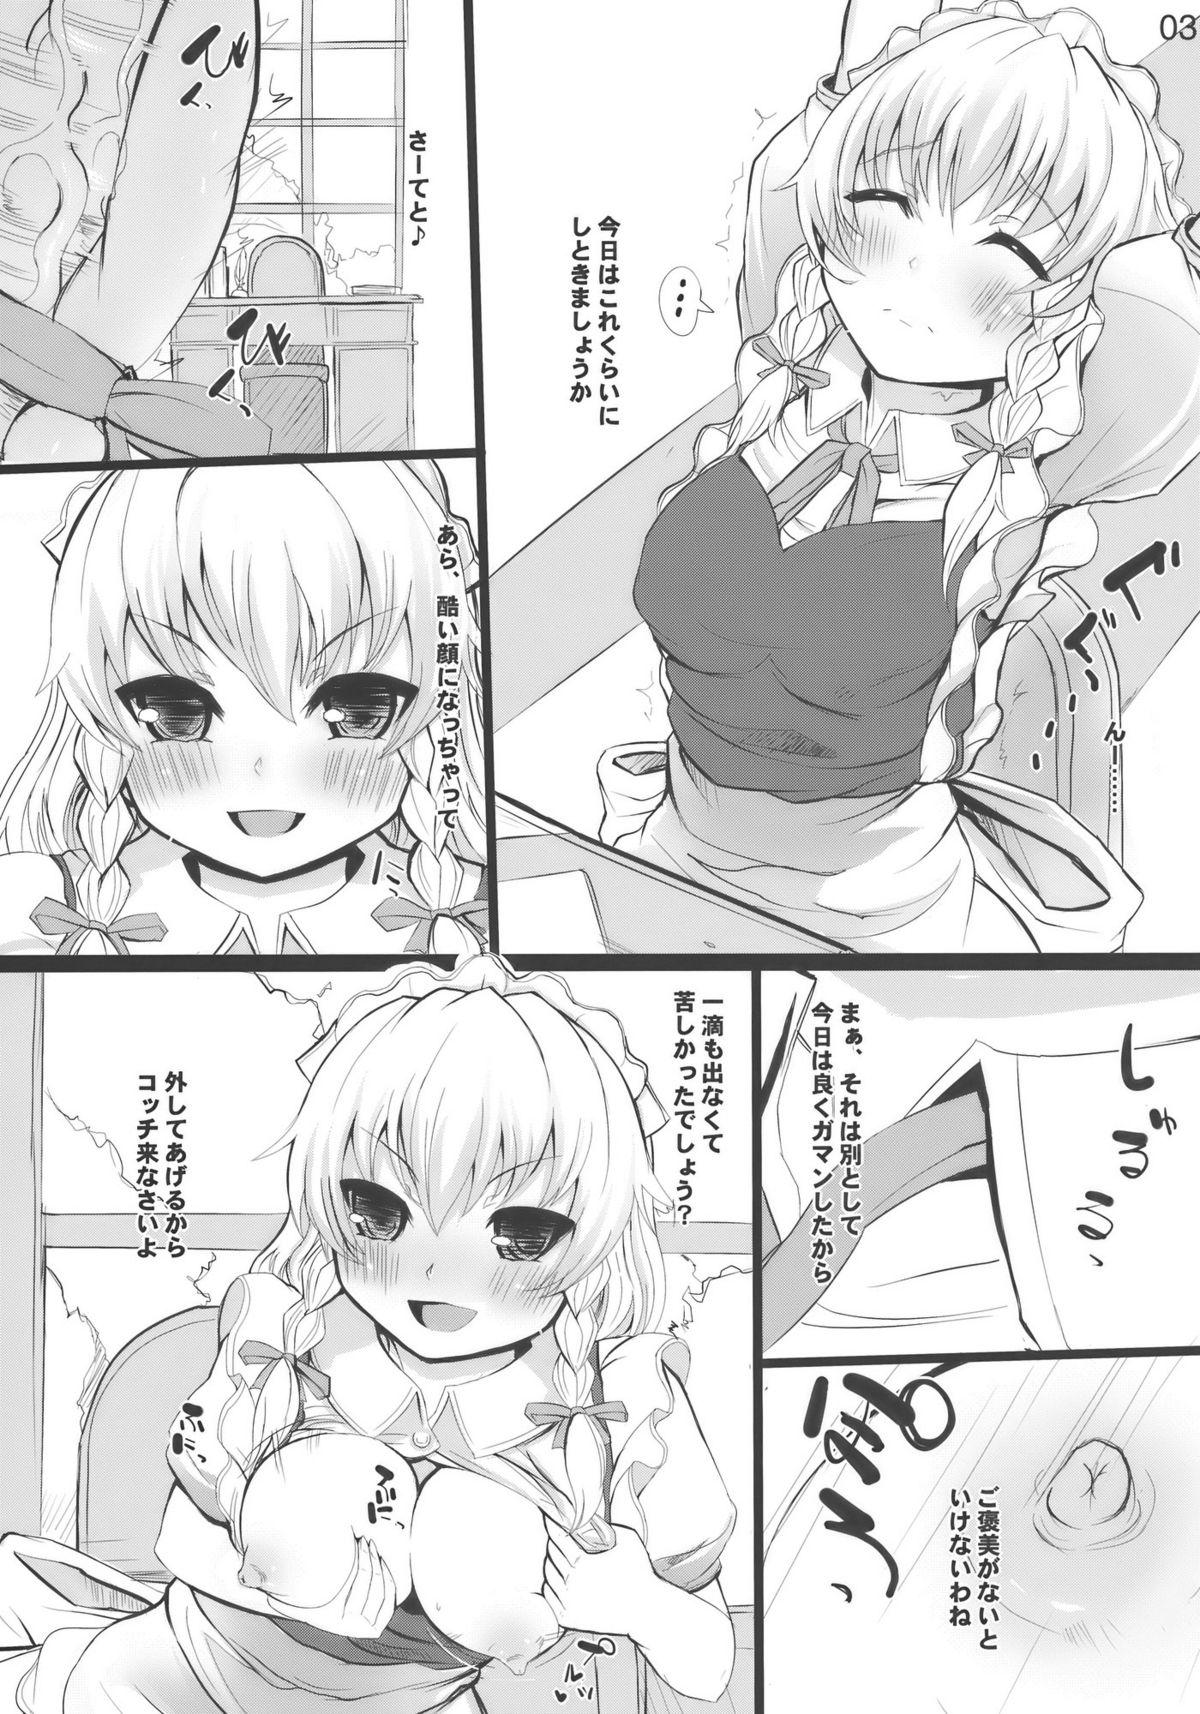 Teen Fuck Feed me with your Kiss - Touhou project De Quatro - Page 3